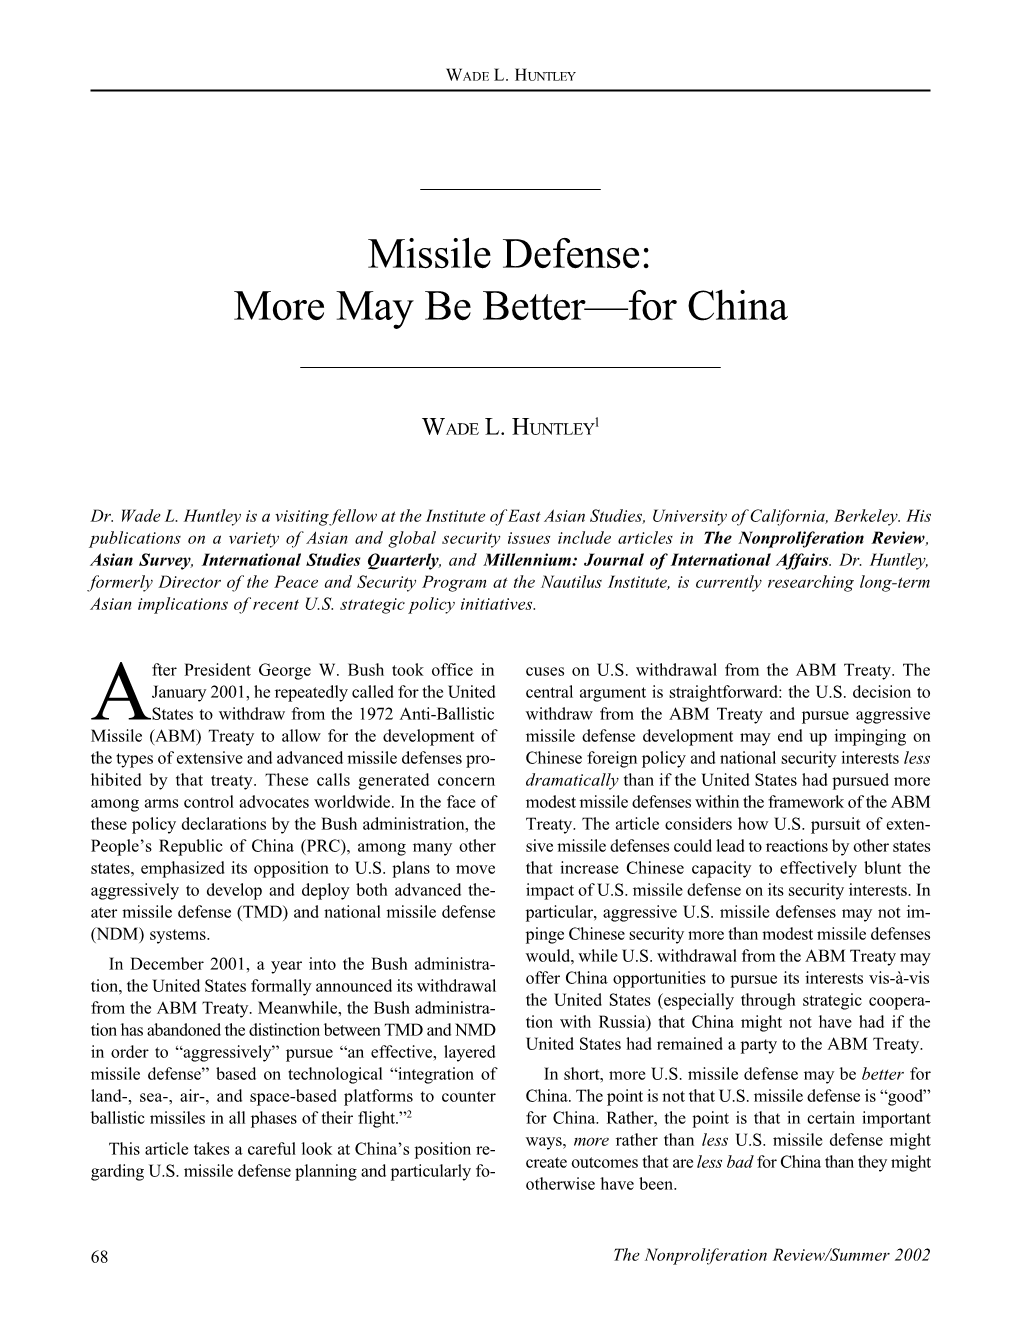 NPR 9.2: Article: Missile Defense: More May Be Better—For China